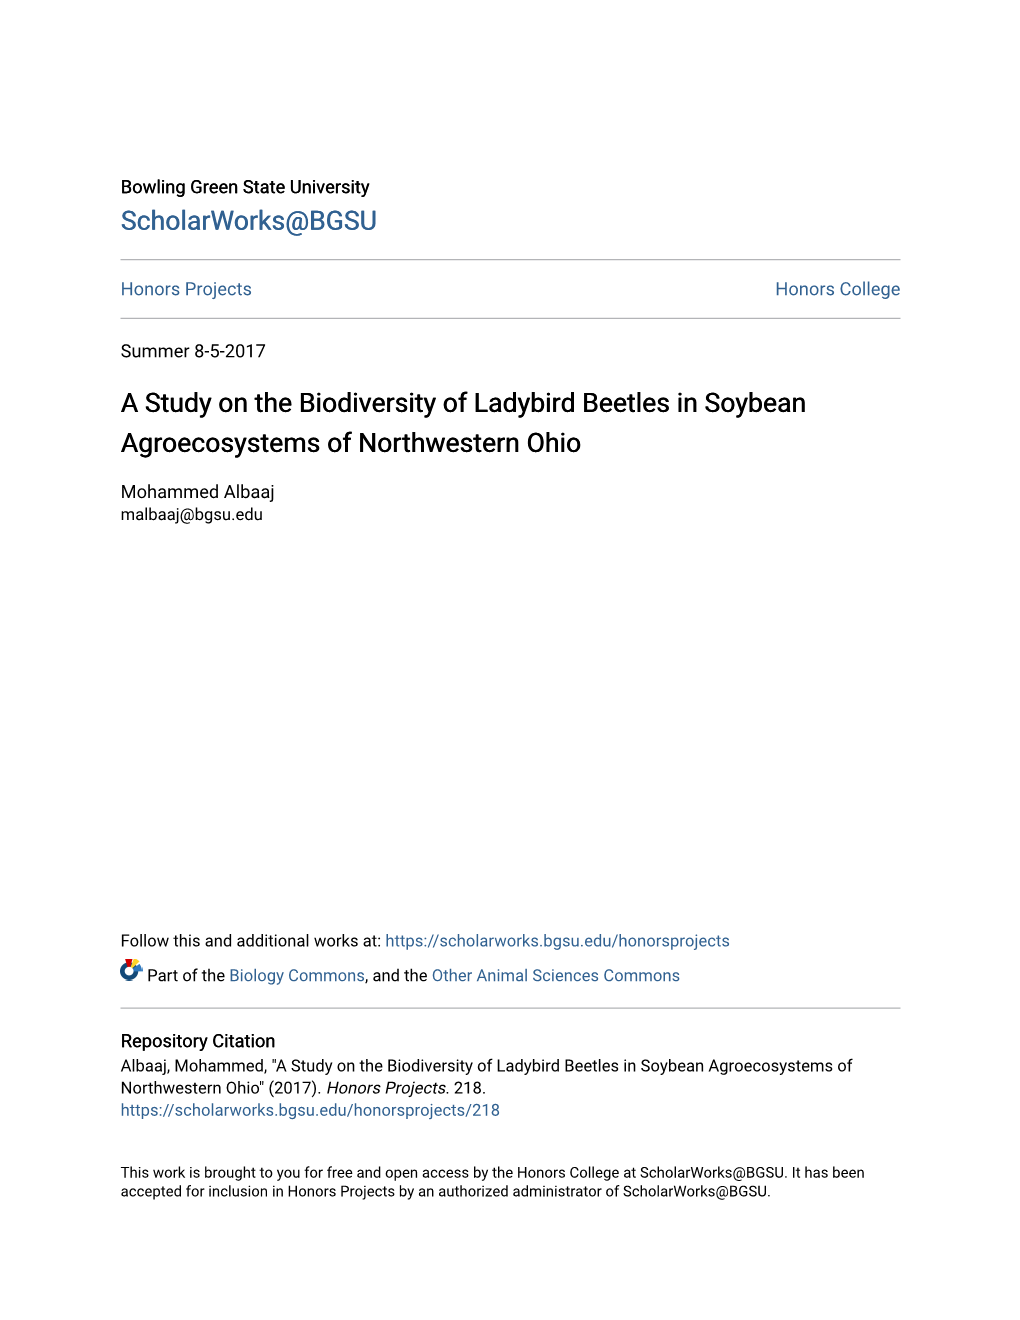 A Study on the Biodiversity of Ladybird Beetles in Soybean Agroecosystems of Northwestern Ohio